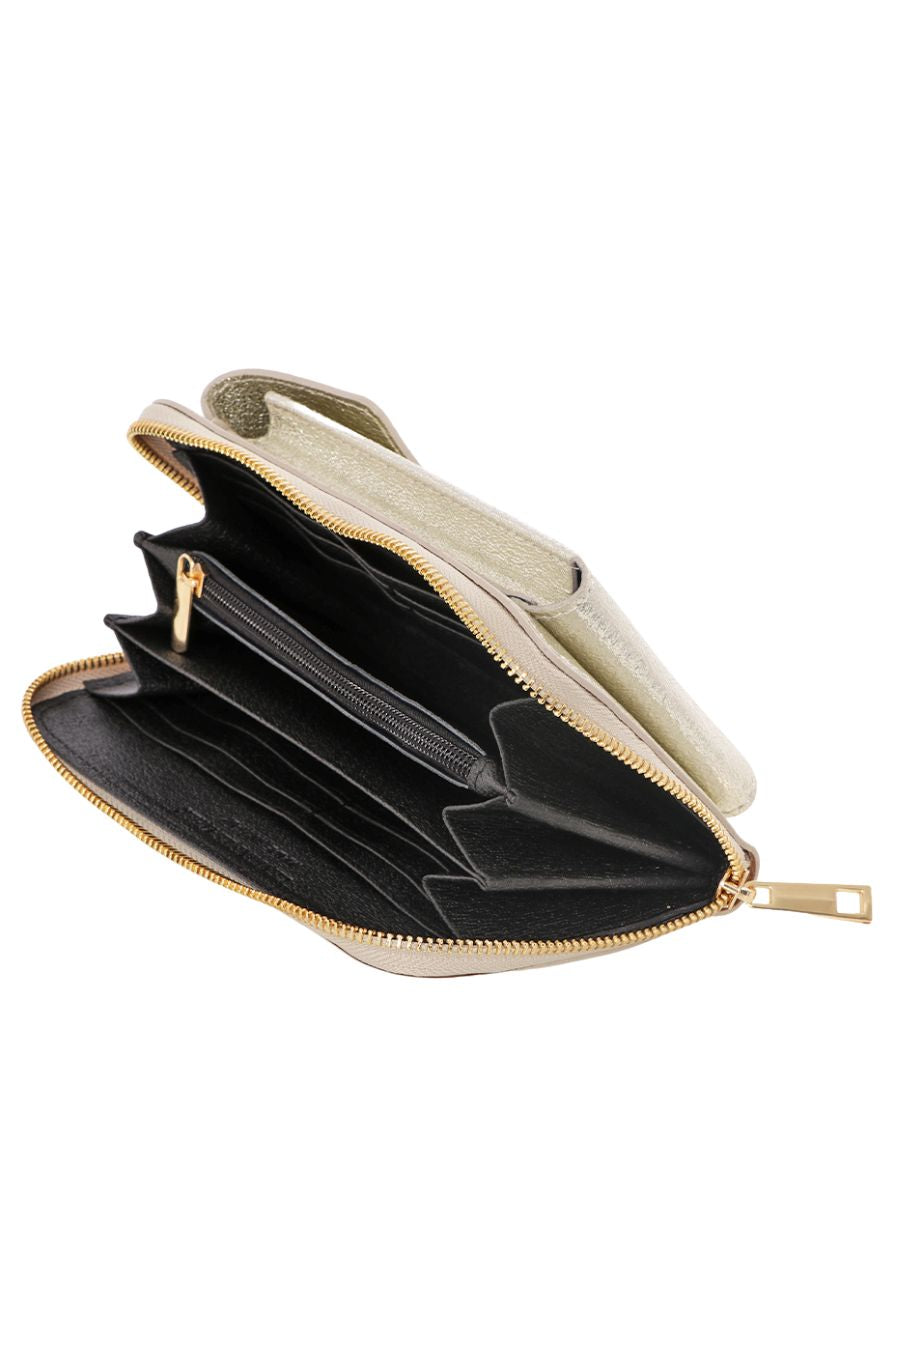 Gold Genuine Italian Leather Mobile Phone Wallet Combo Bag